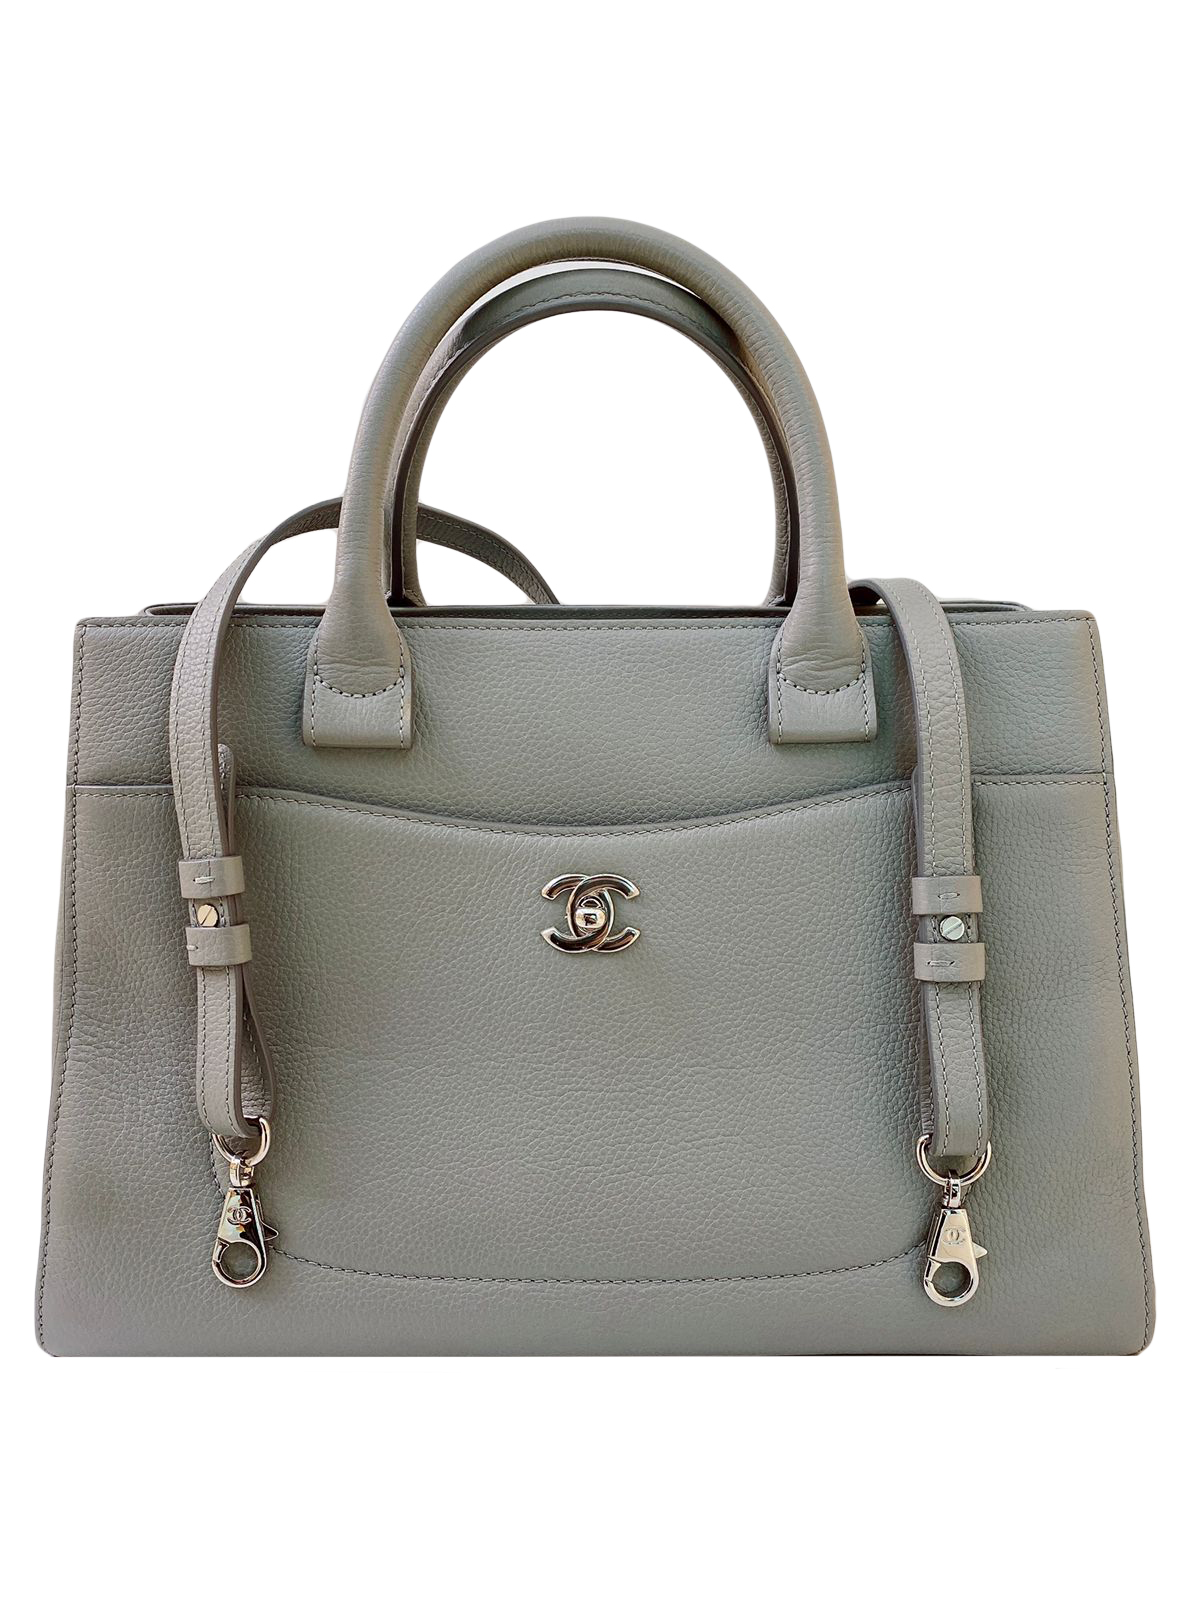 GRAY LEATHER SMALL NEO EXECUTIVE SHOPPER TOTE BAG - styleforless